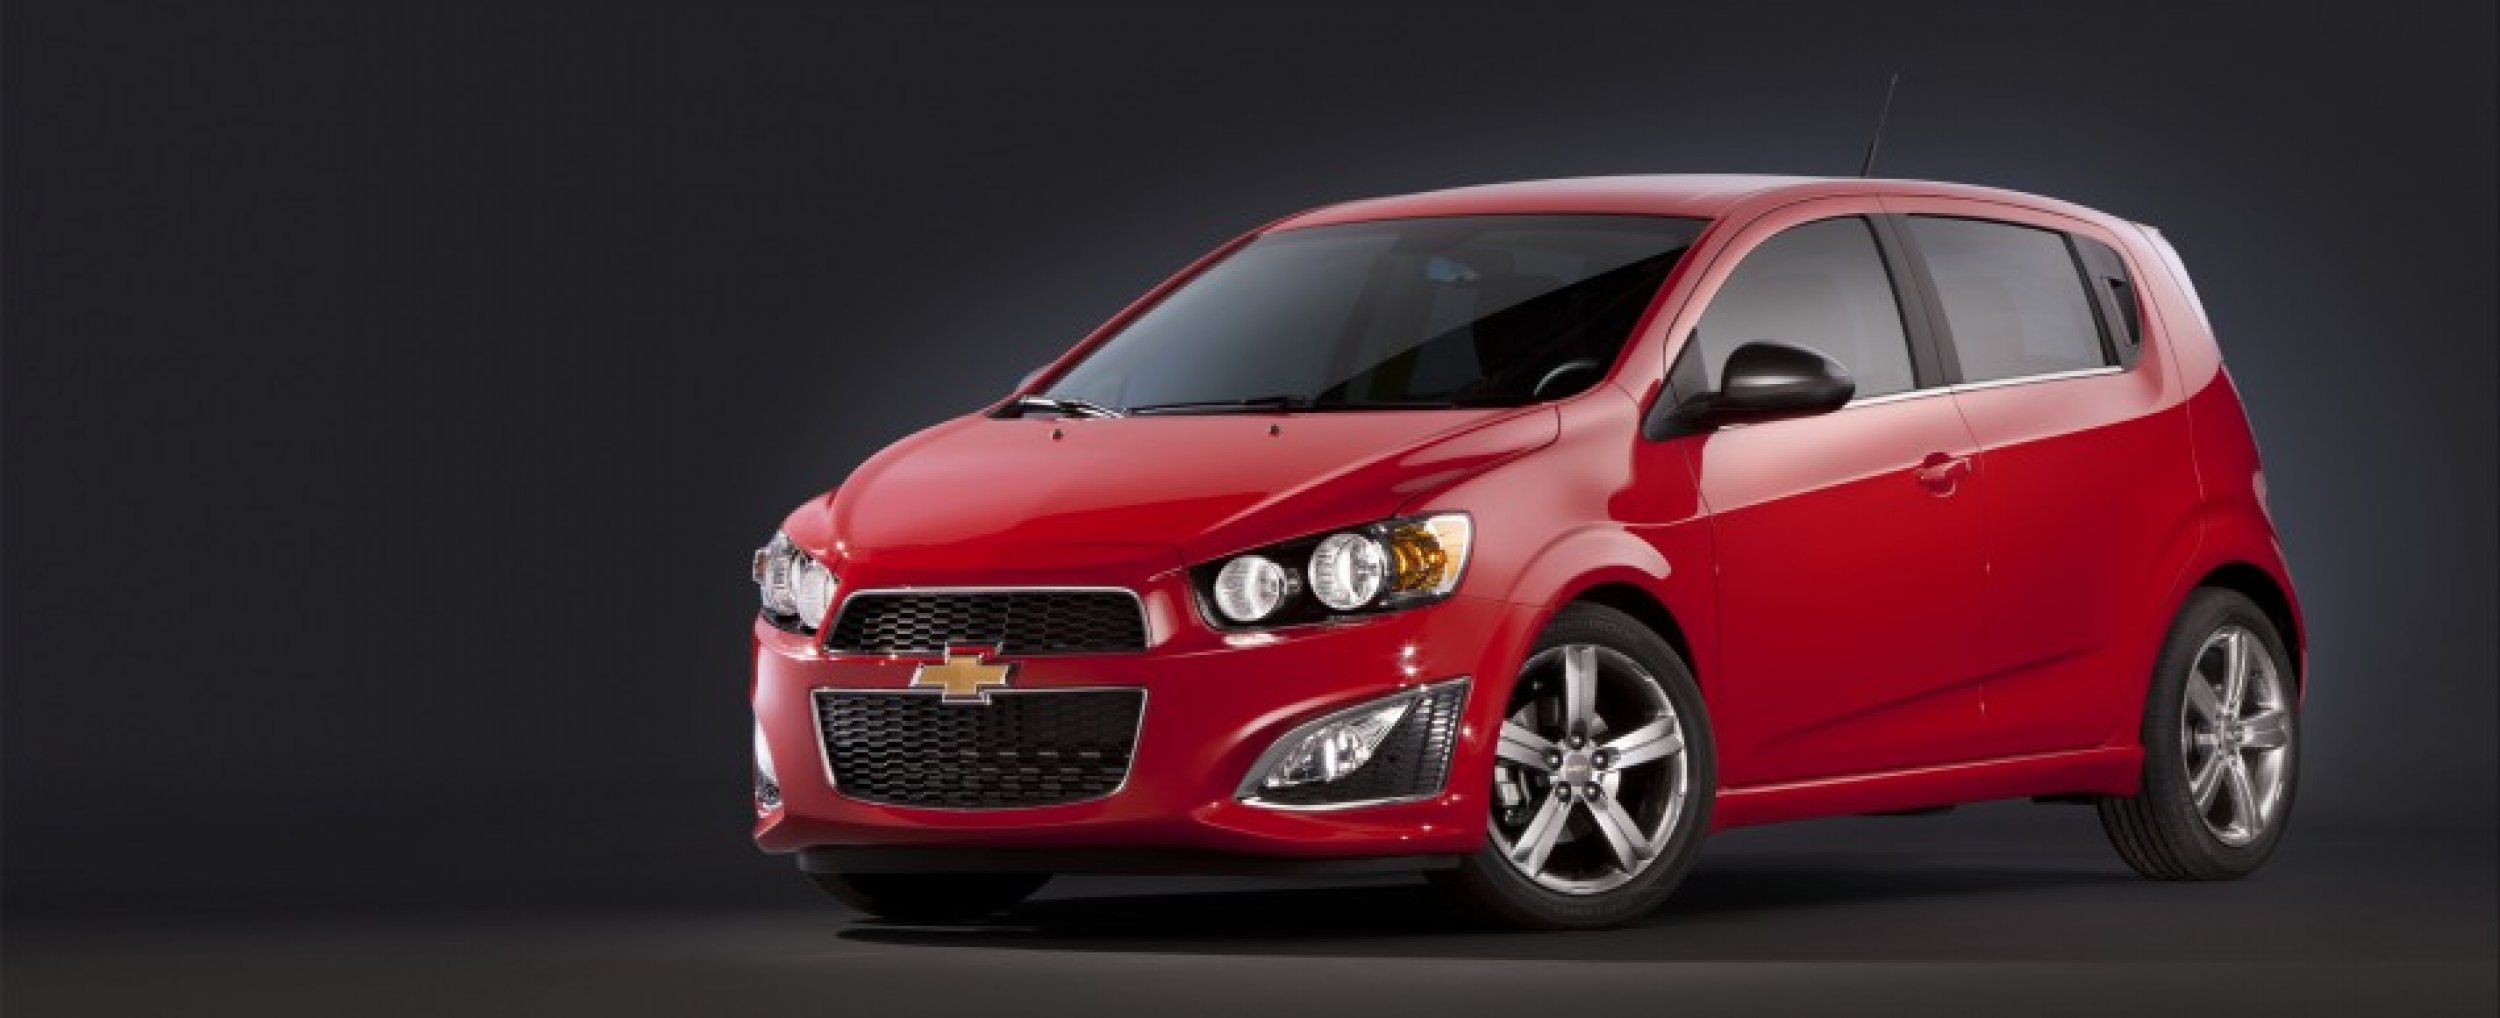 Chevy Sonic front